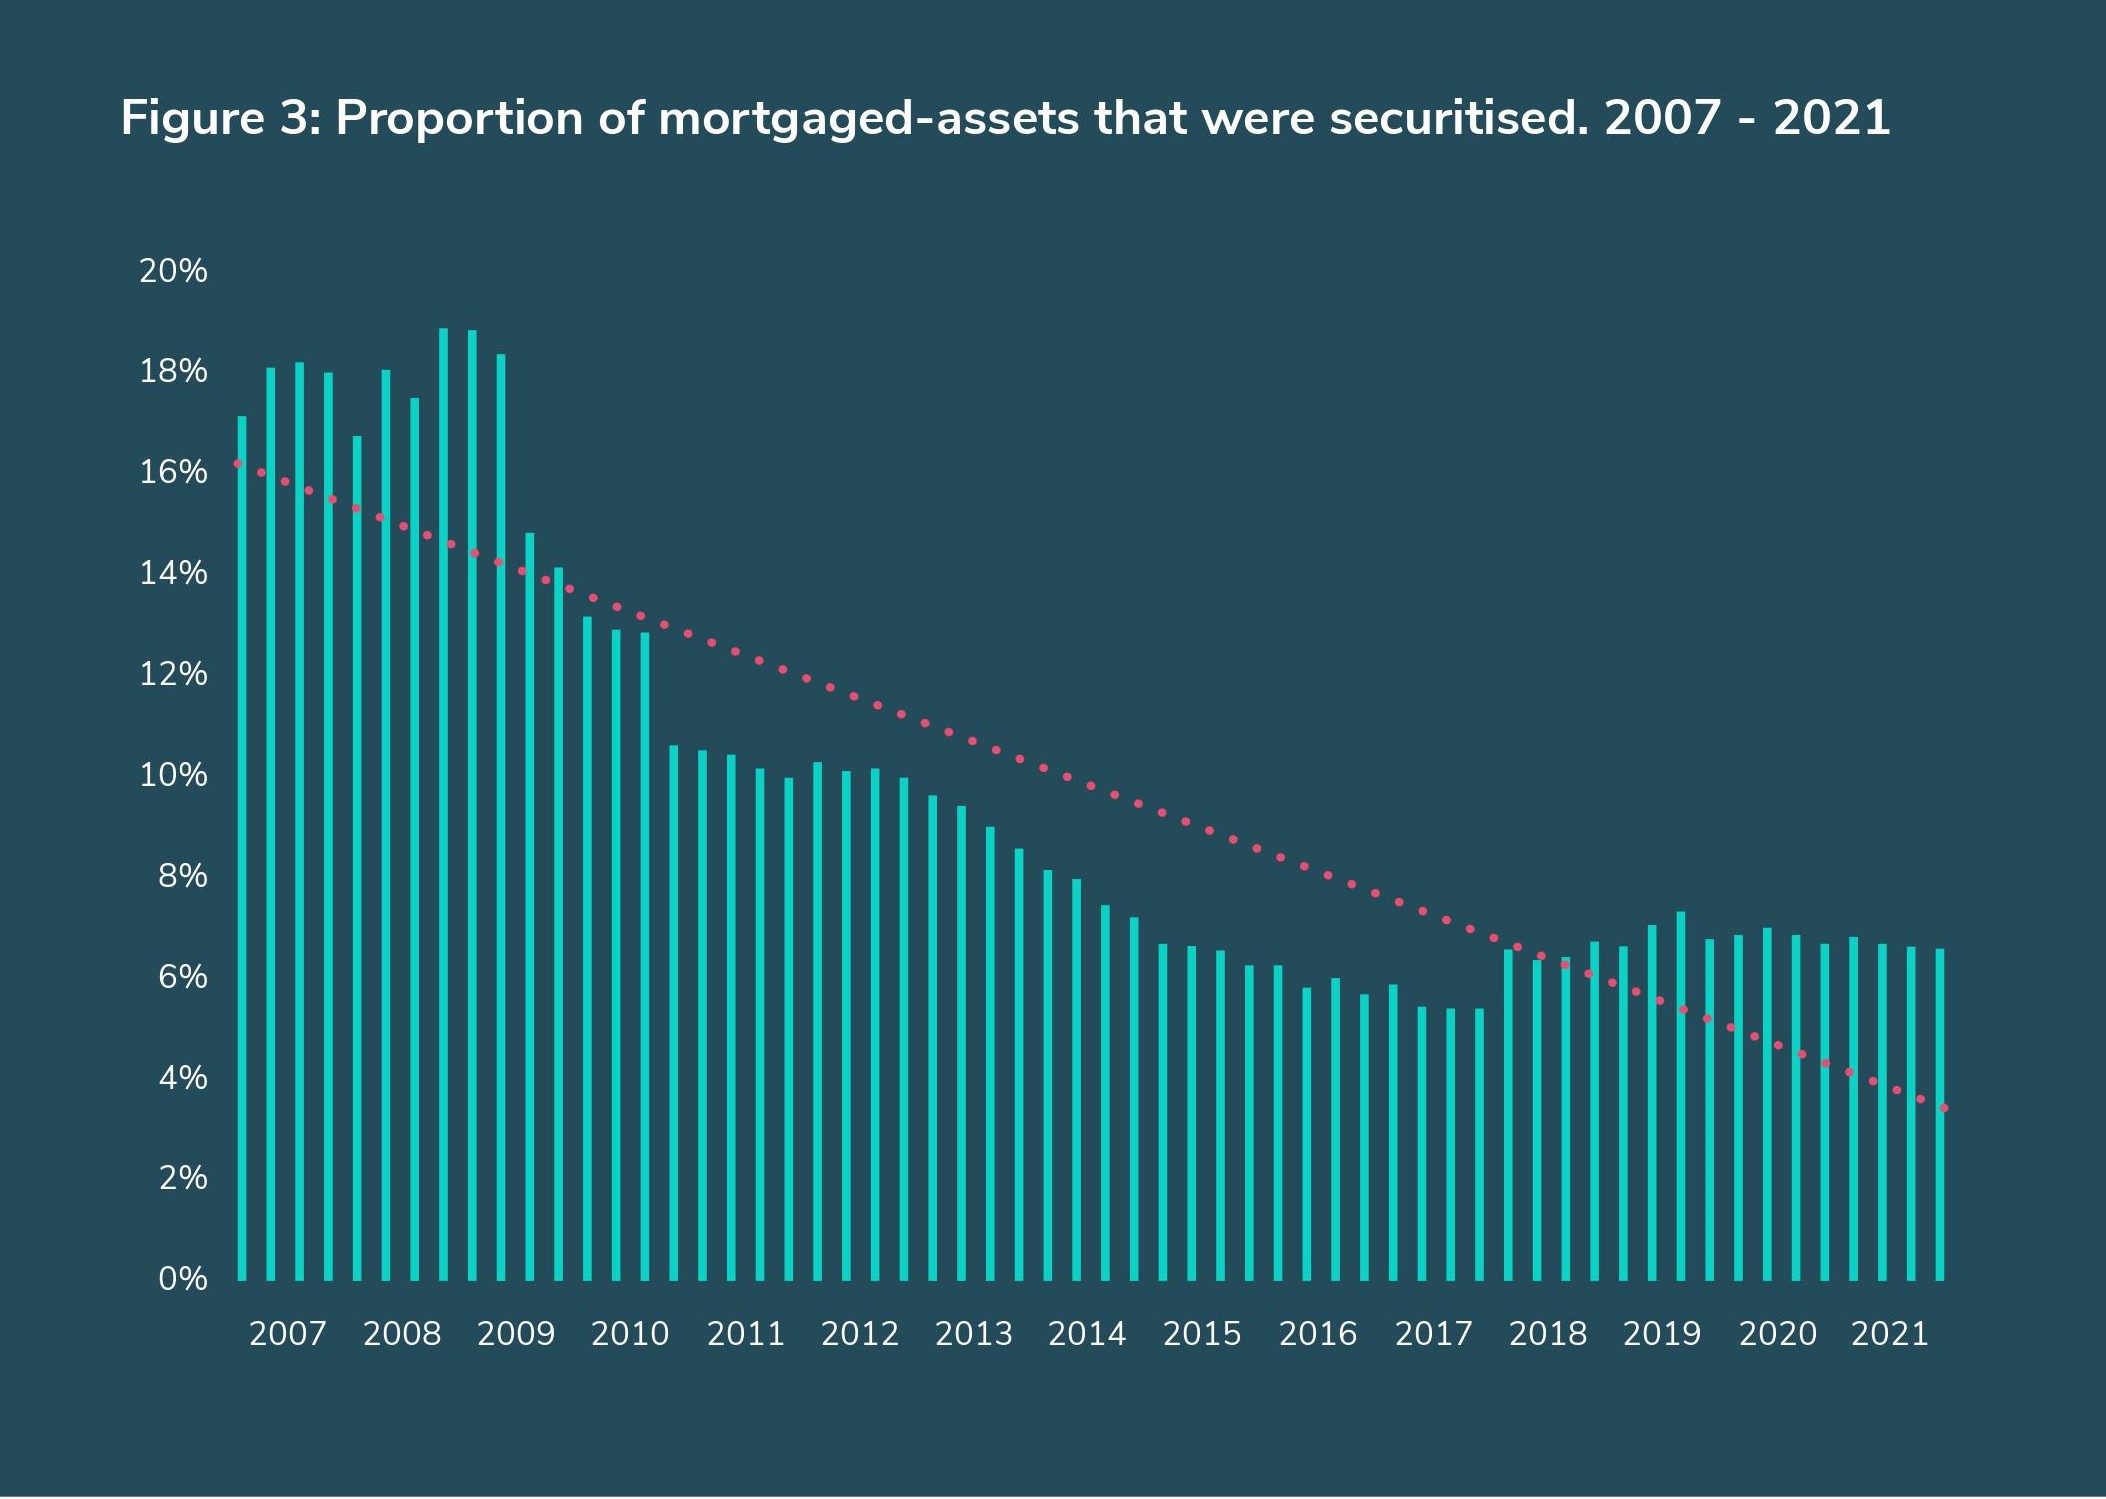 Figure 3: The proportion of mortgaged-assets that were securitised between 2007-21.